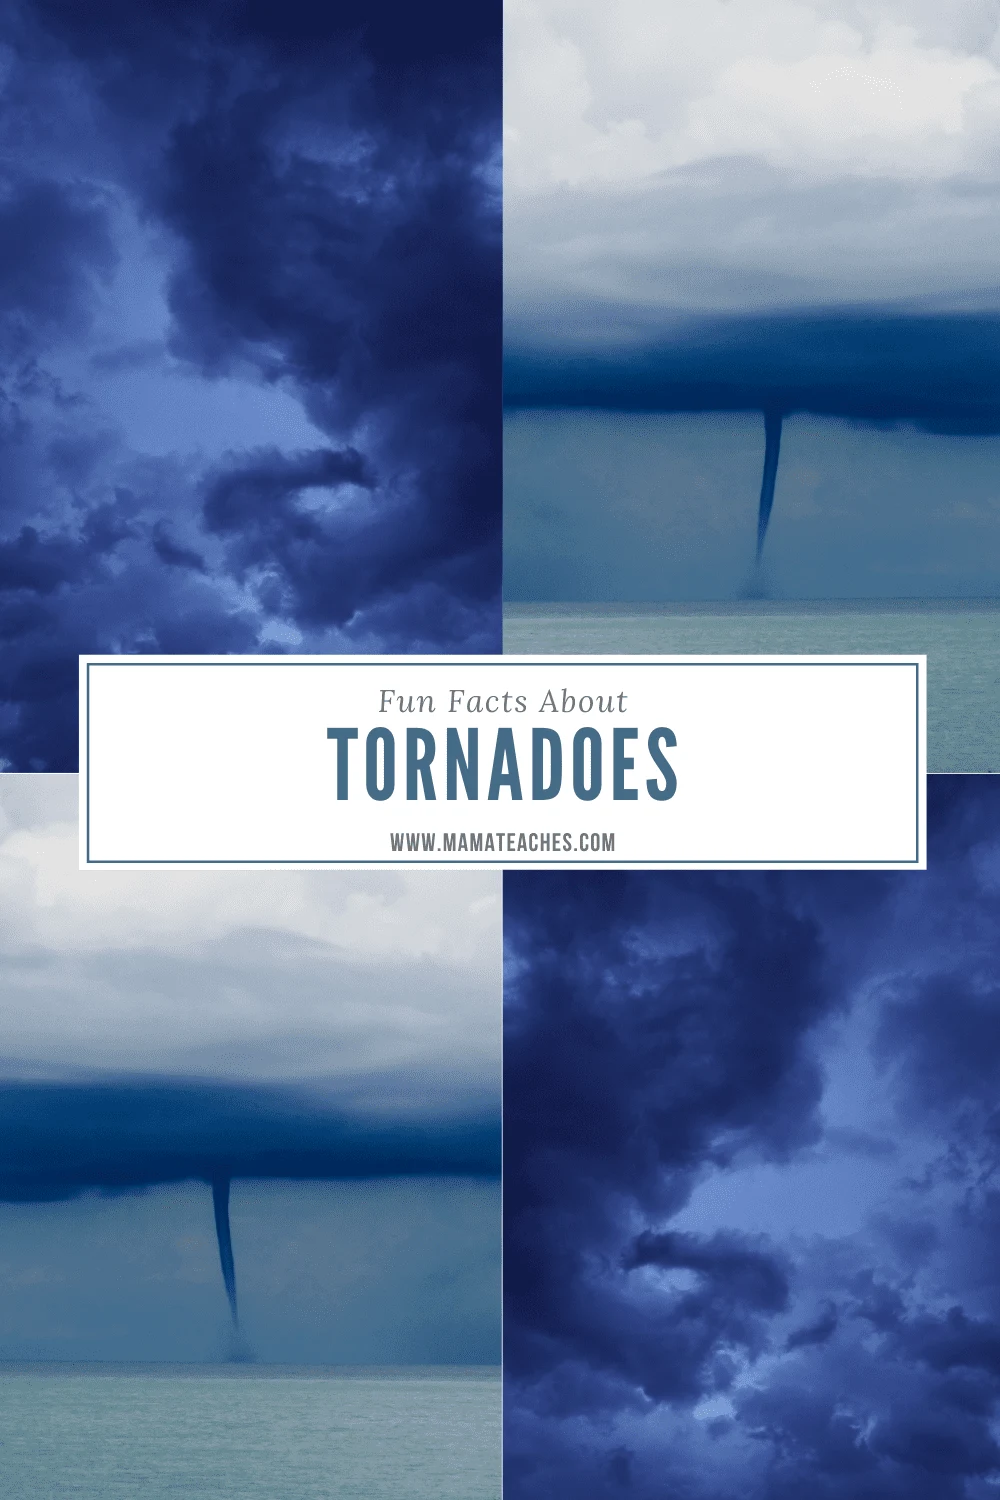 Fun Facts About Tornadoes